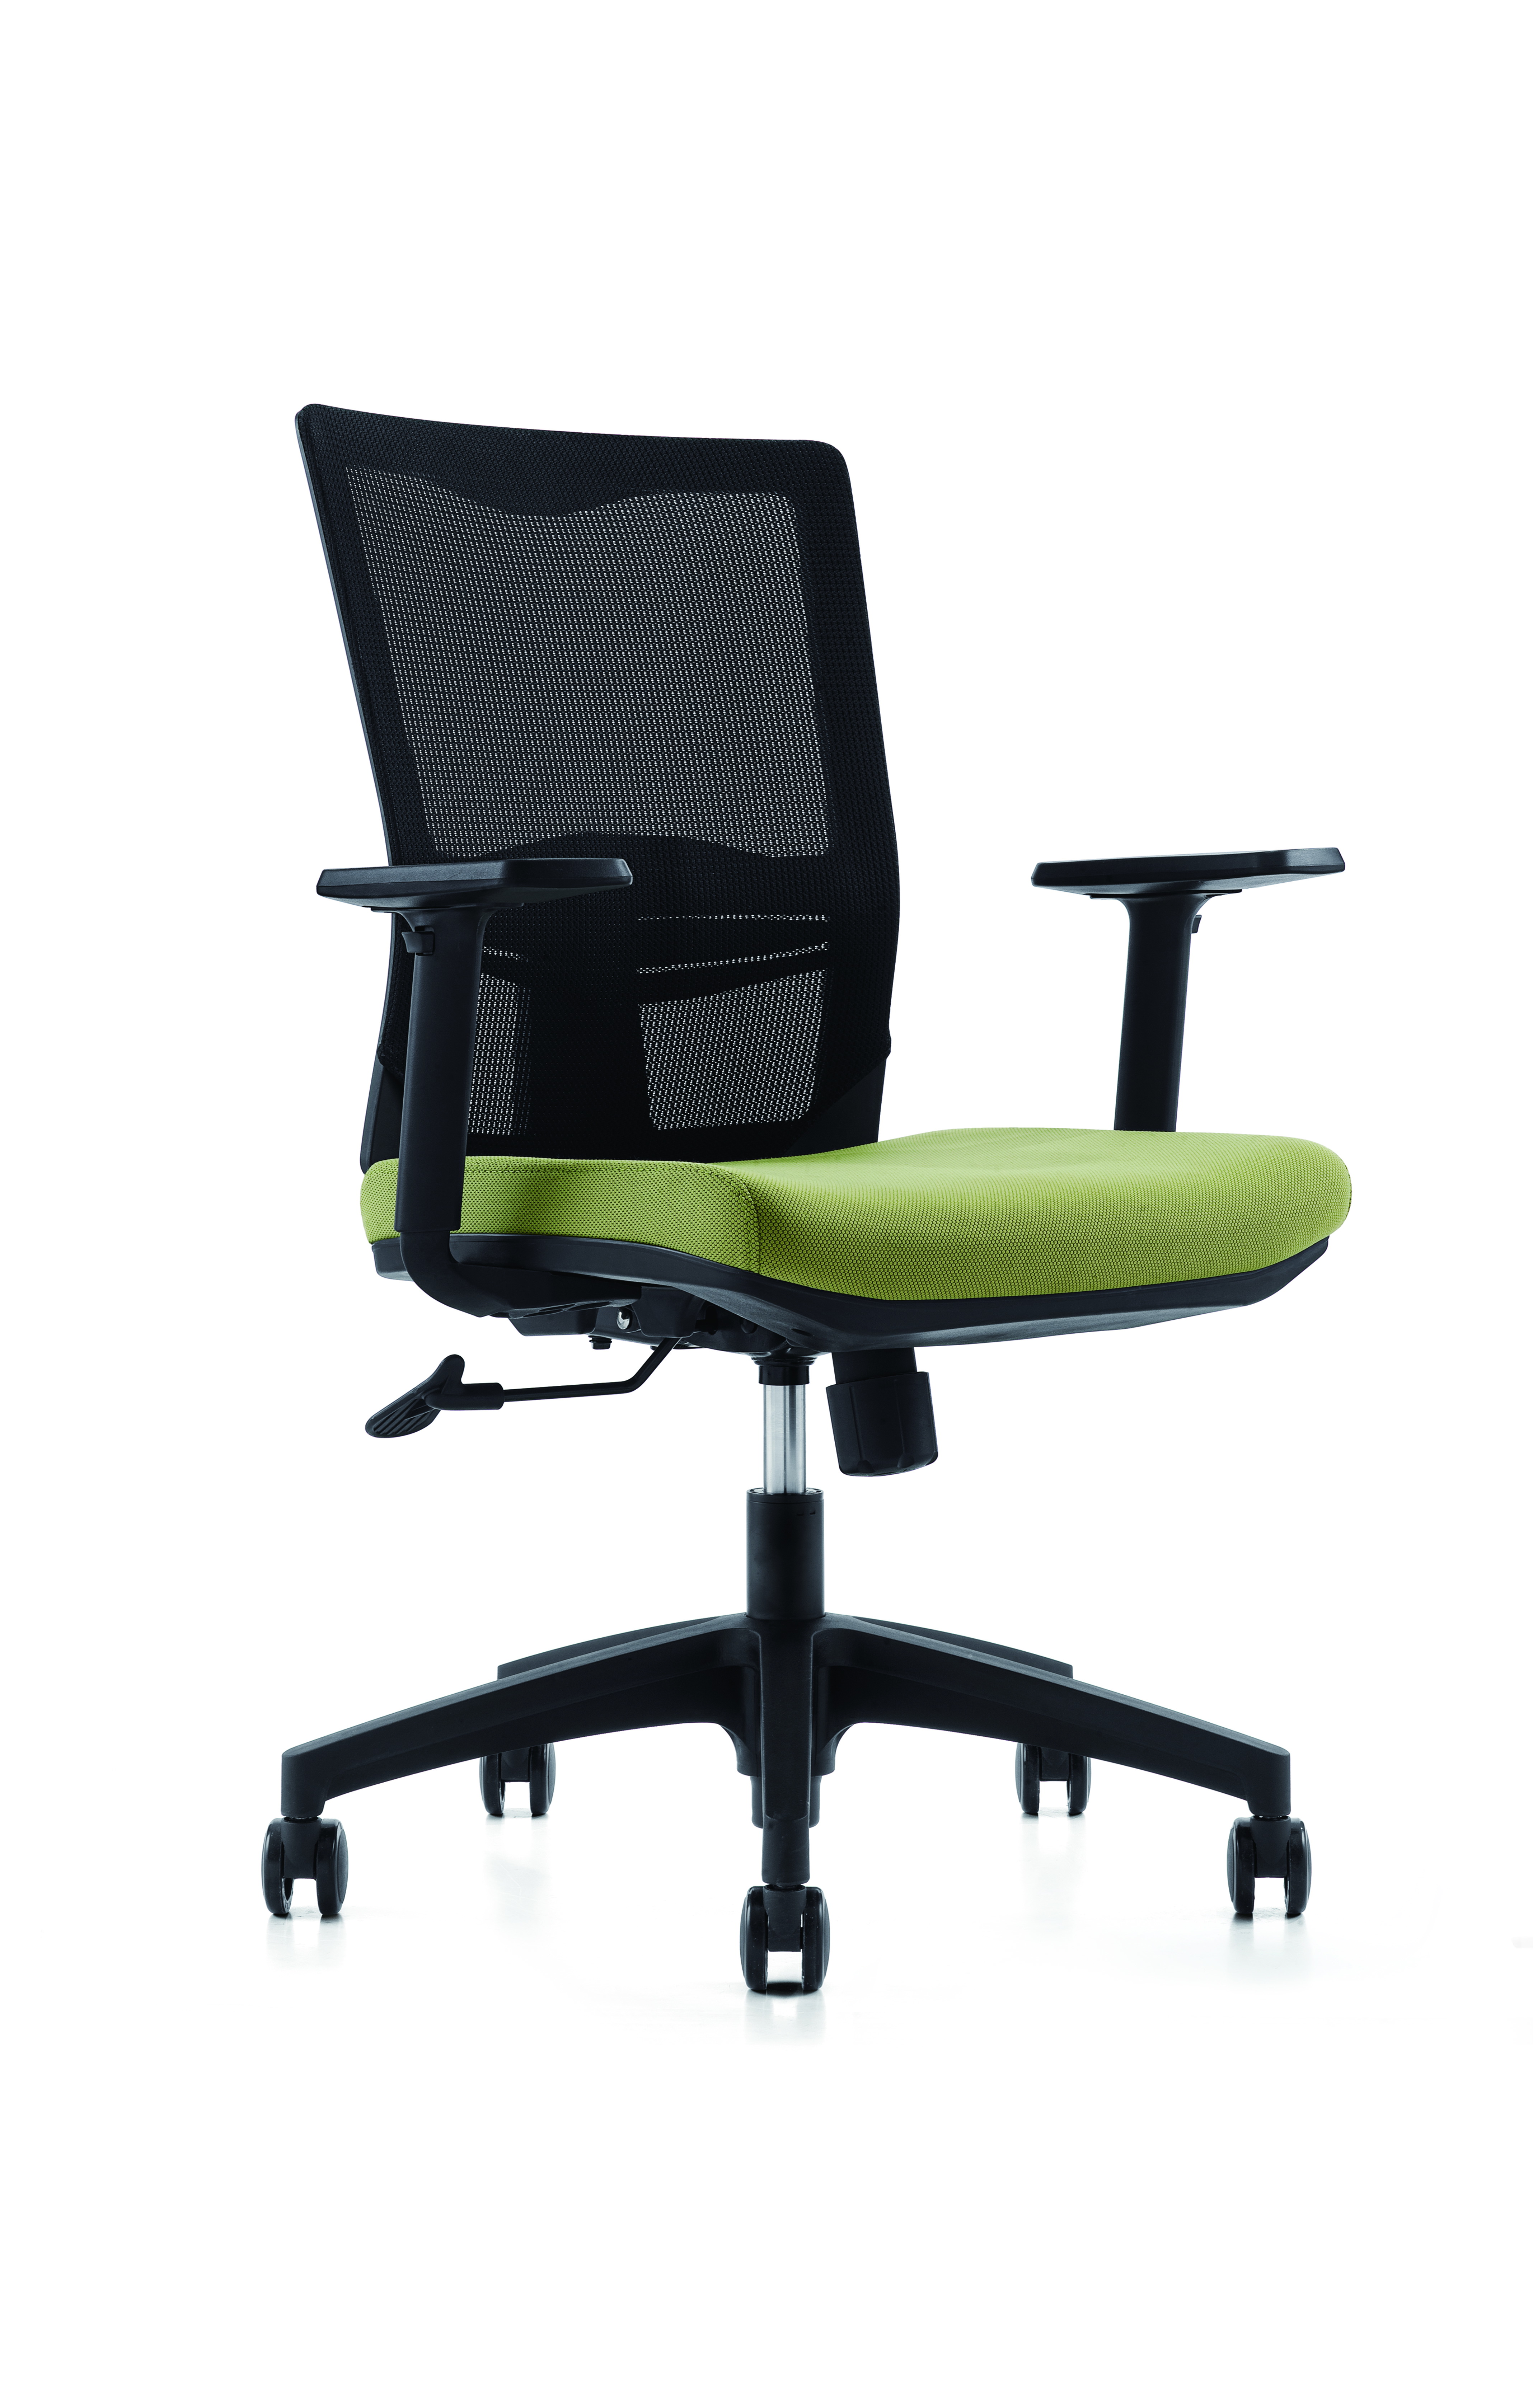 OEM/ODM Supplier Fabric Gaming Chair - Cheap price Modern Full Mesh Office Chair Back Ergonomic Mesh Office Chair With Headrest Mesh Chair 133F Series for Office Use  – SitZone